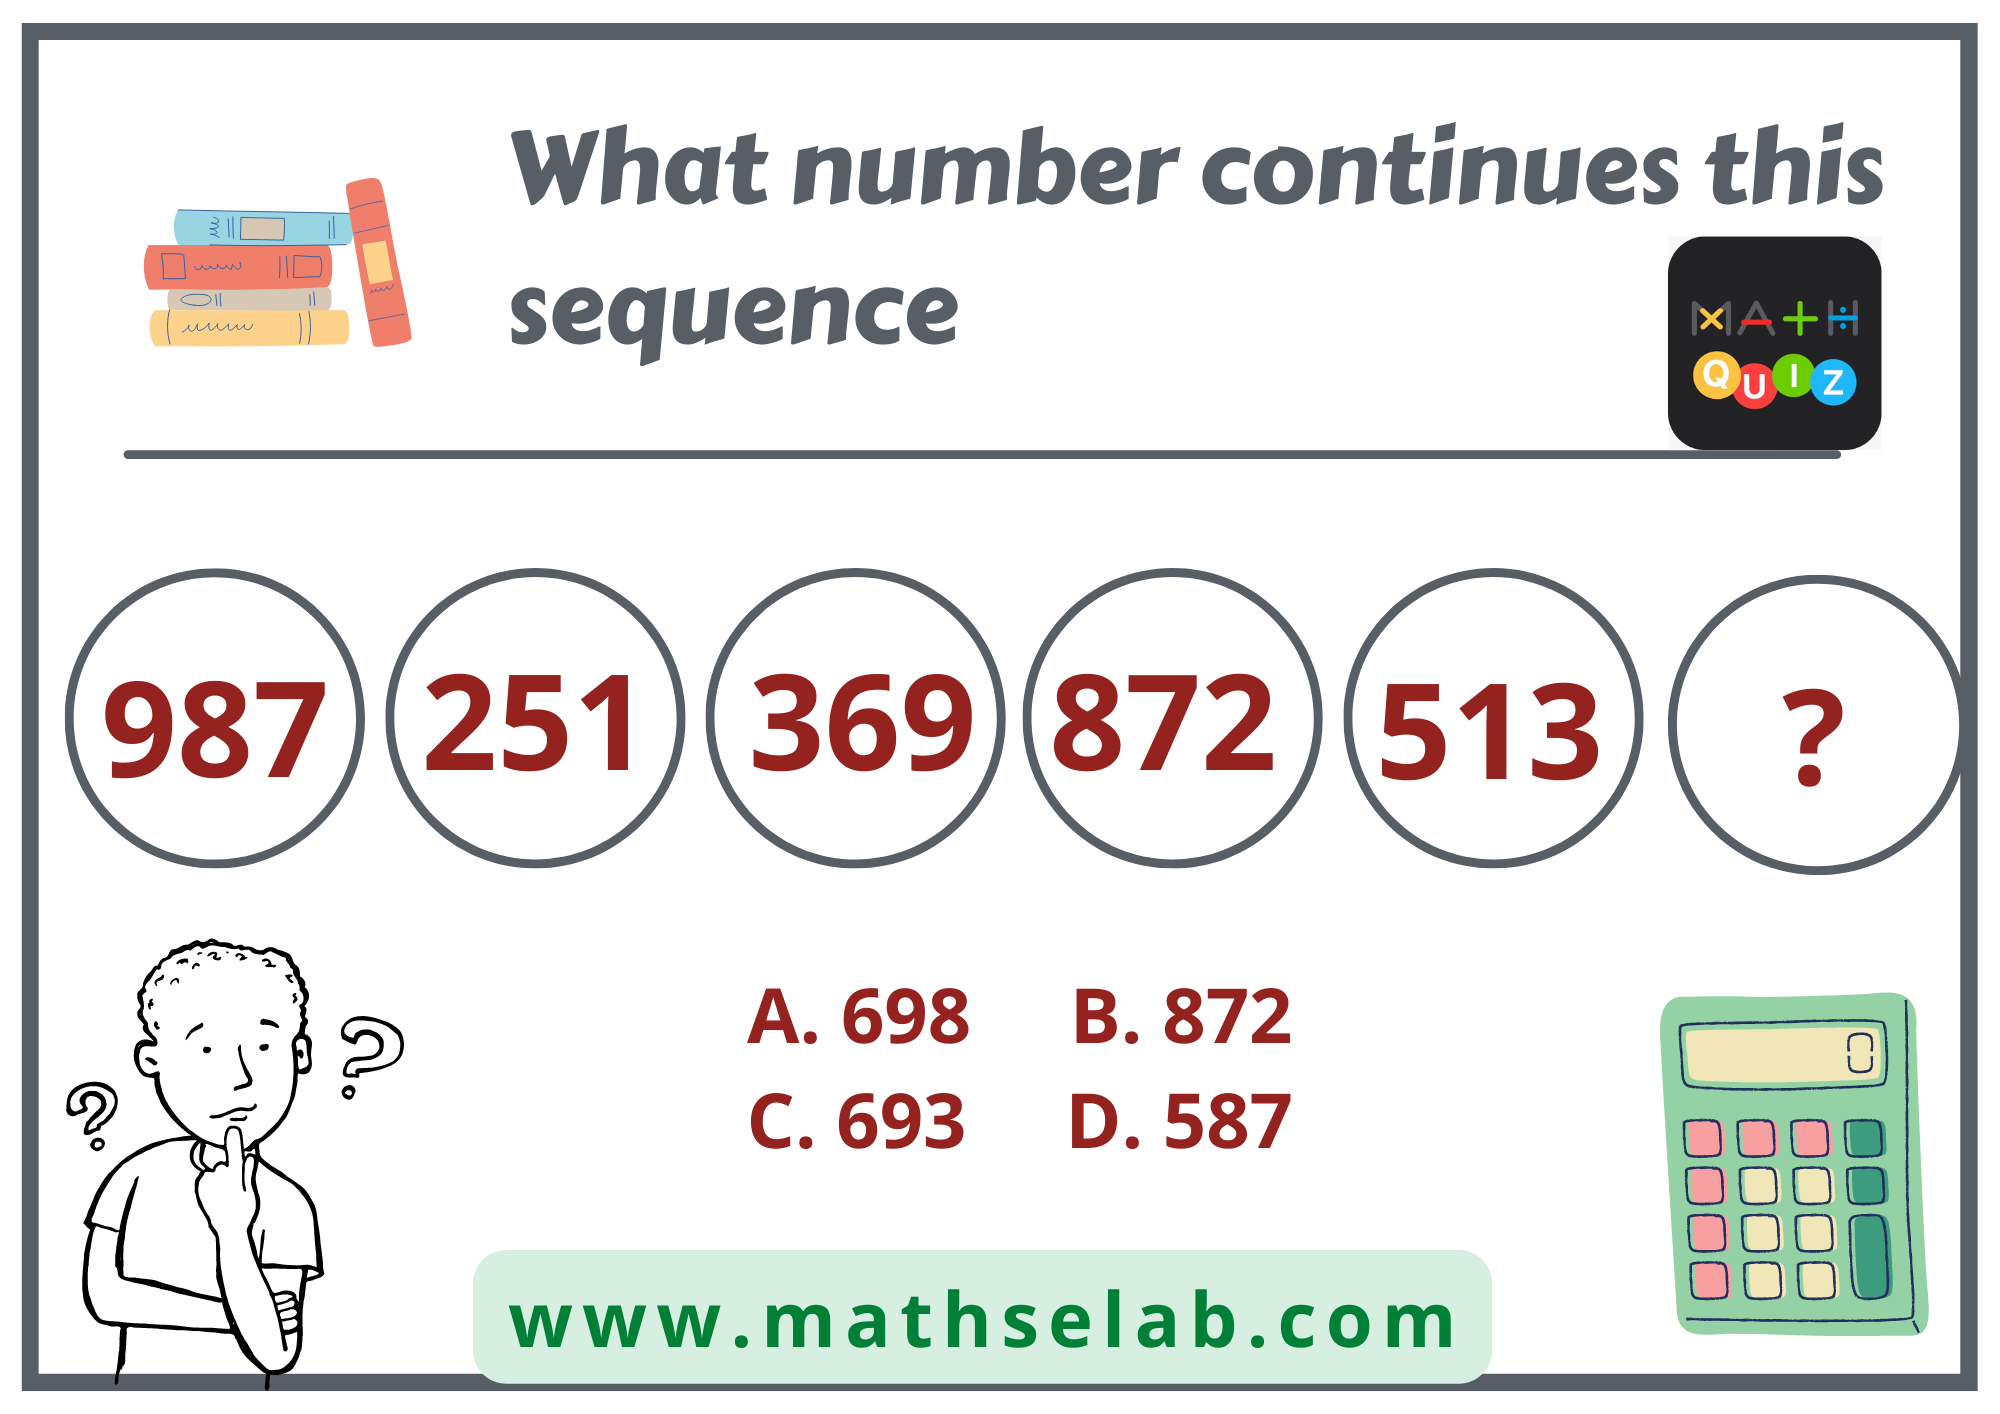 What number continues this sequence? 987, 251, 369, 872, 513, ?